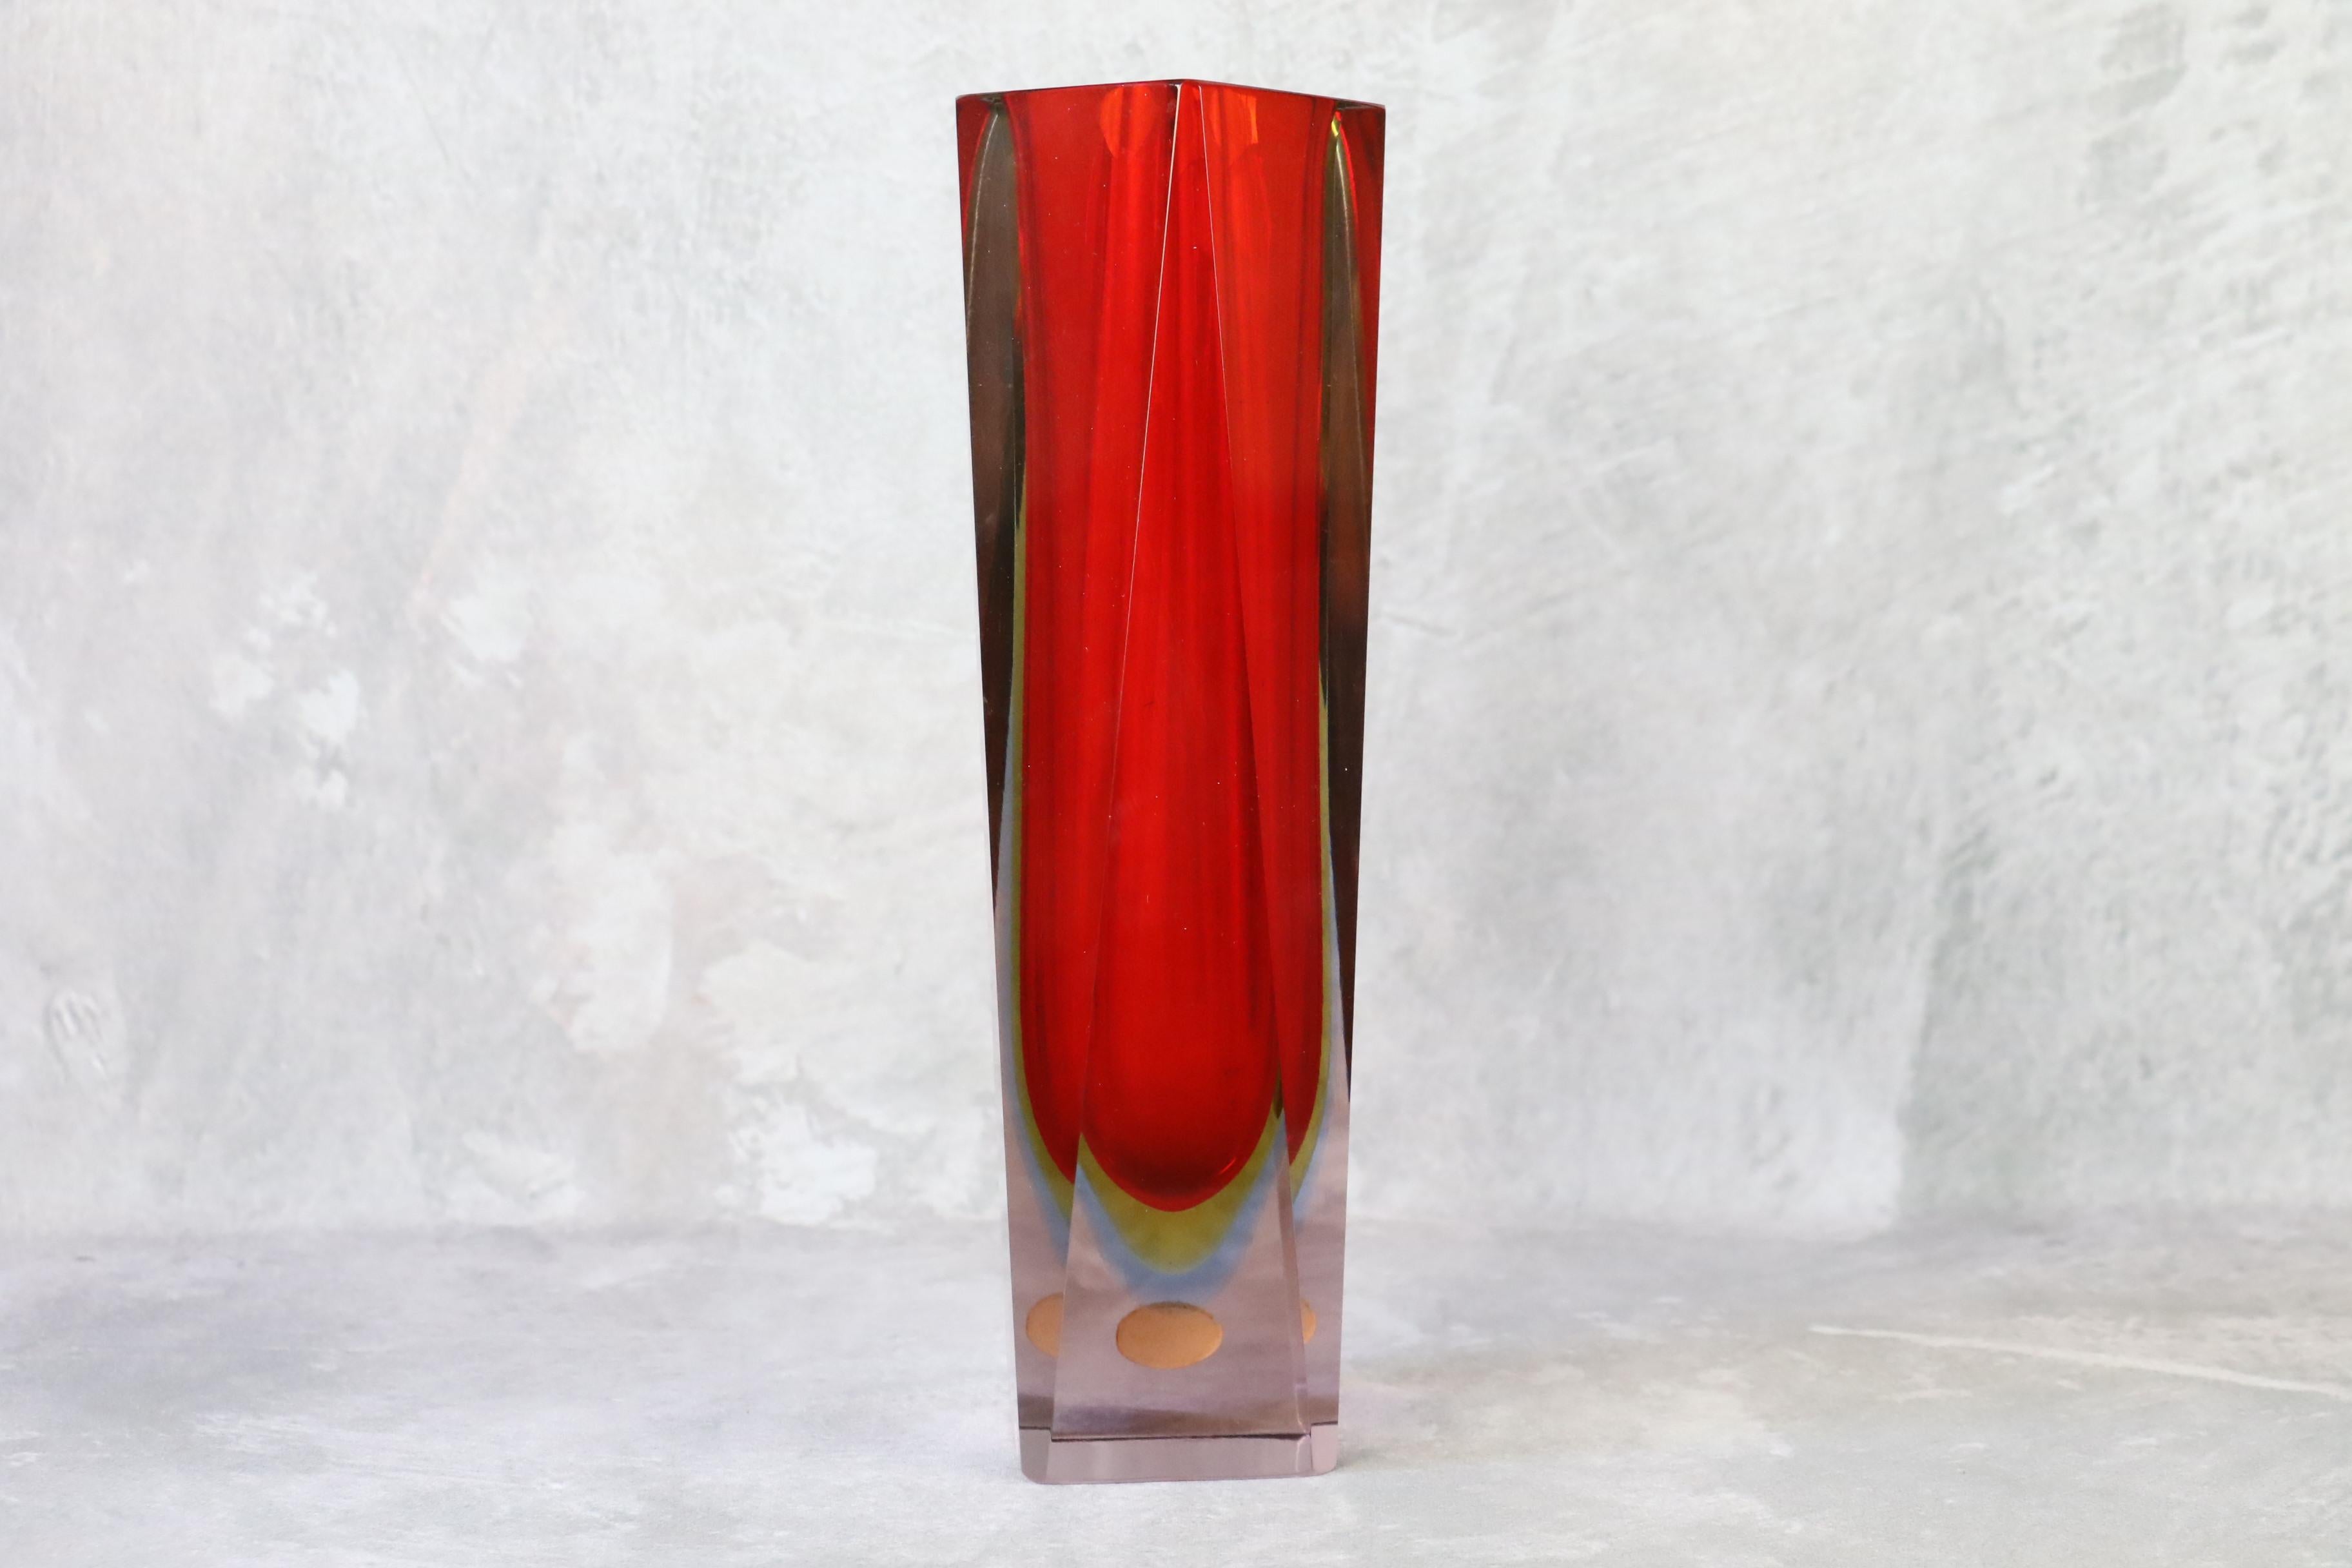 Midcentury Murano Glass vase by Flavio Poli - Seguso - Faceted Murano Glass

This is a beautiful Murano glass vase by Flavio Poli. It is made according to the technique of sommerso which allows to superimpose several layers of glass and obtain